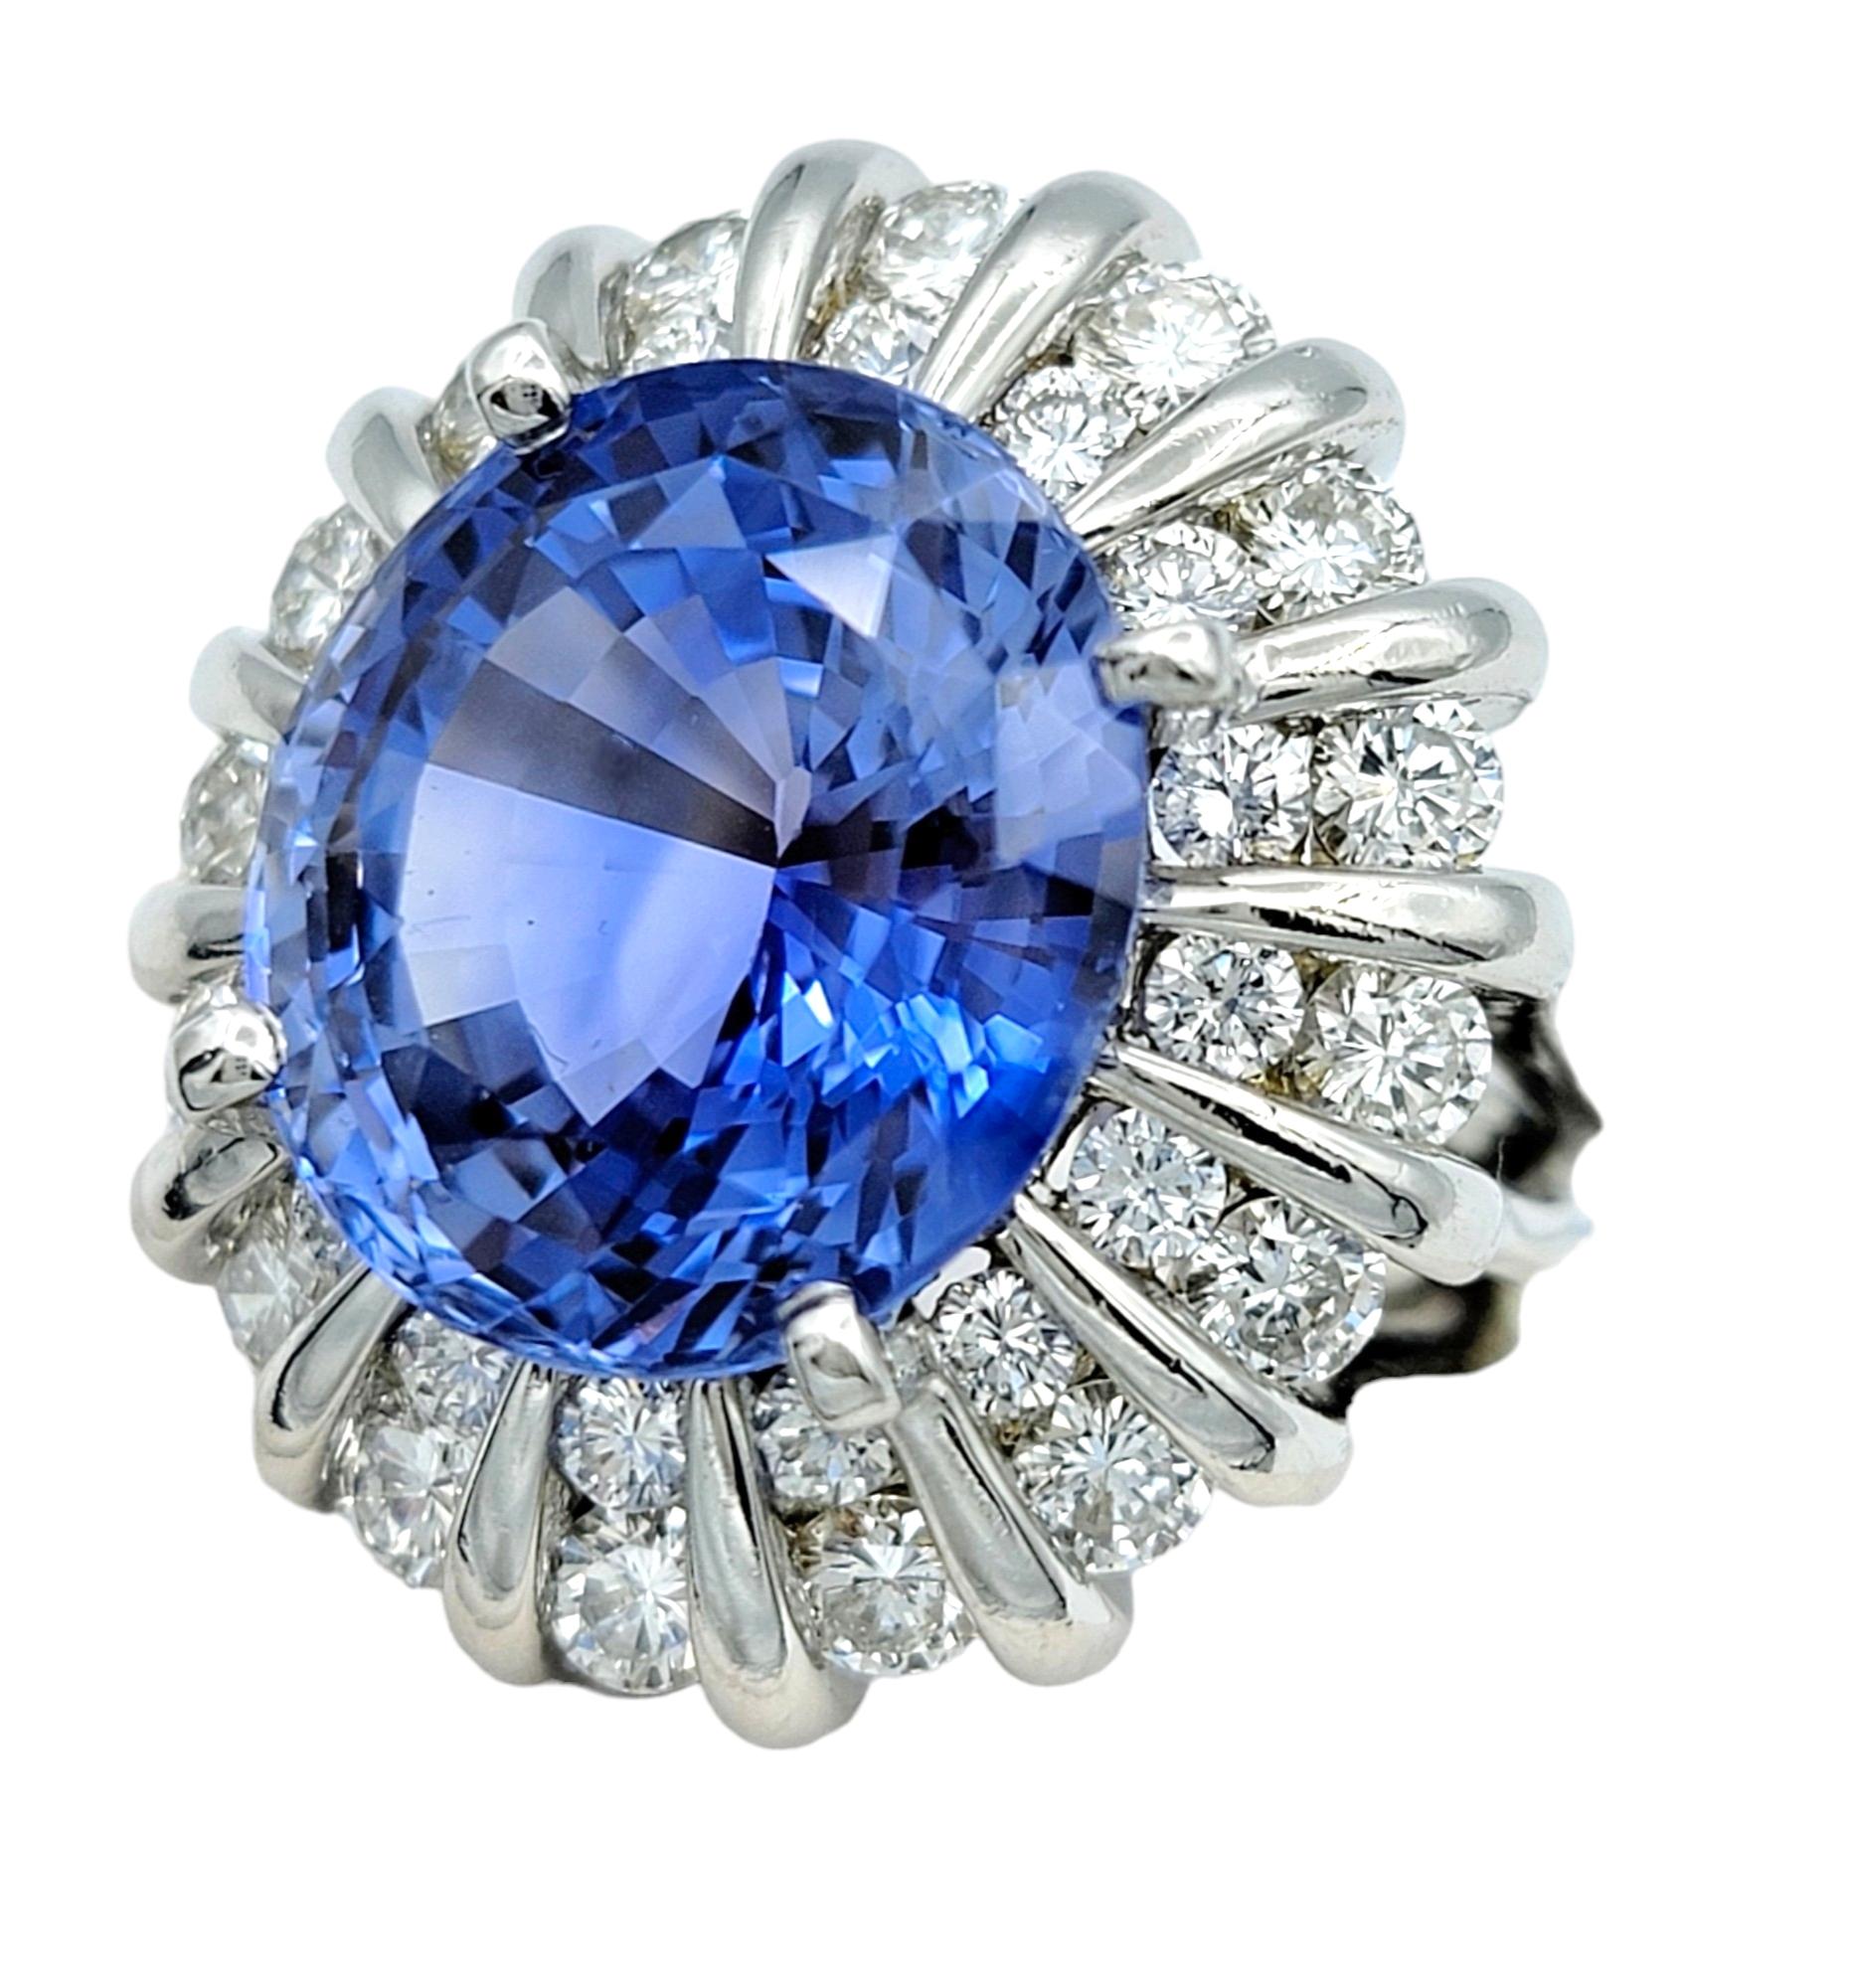 Rare Untreated 16.27 Carat Oval Cut Ceylon Sapphire and Double Diamond Halo Ring In Good Condition For Sale In Scottsdale, AZ